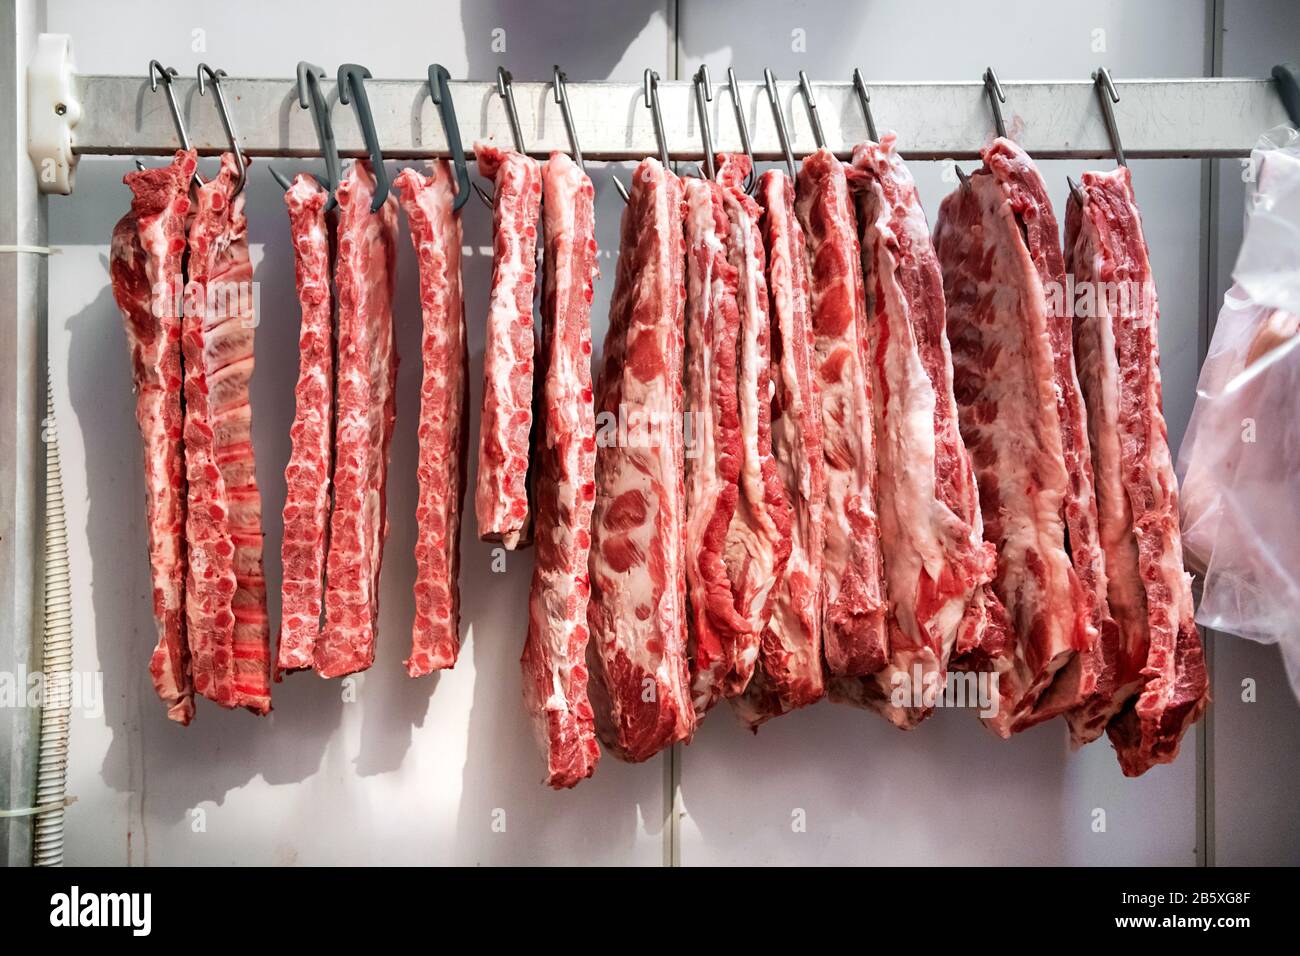 Row of fresh raw pork ribs hanging in refrigerator on metal hooks in butchery or restaurant kitchen Stock Photo